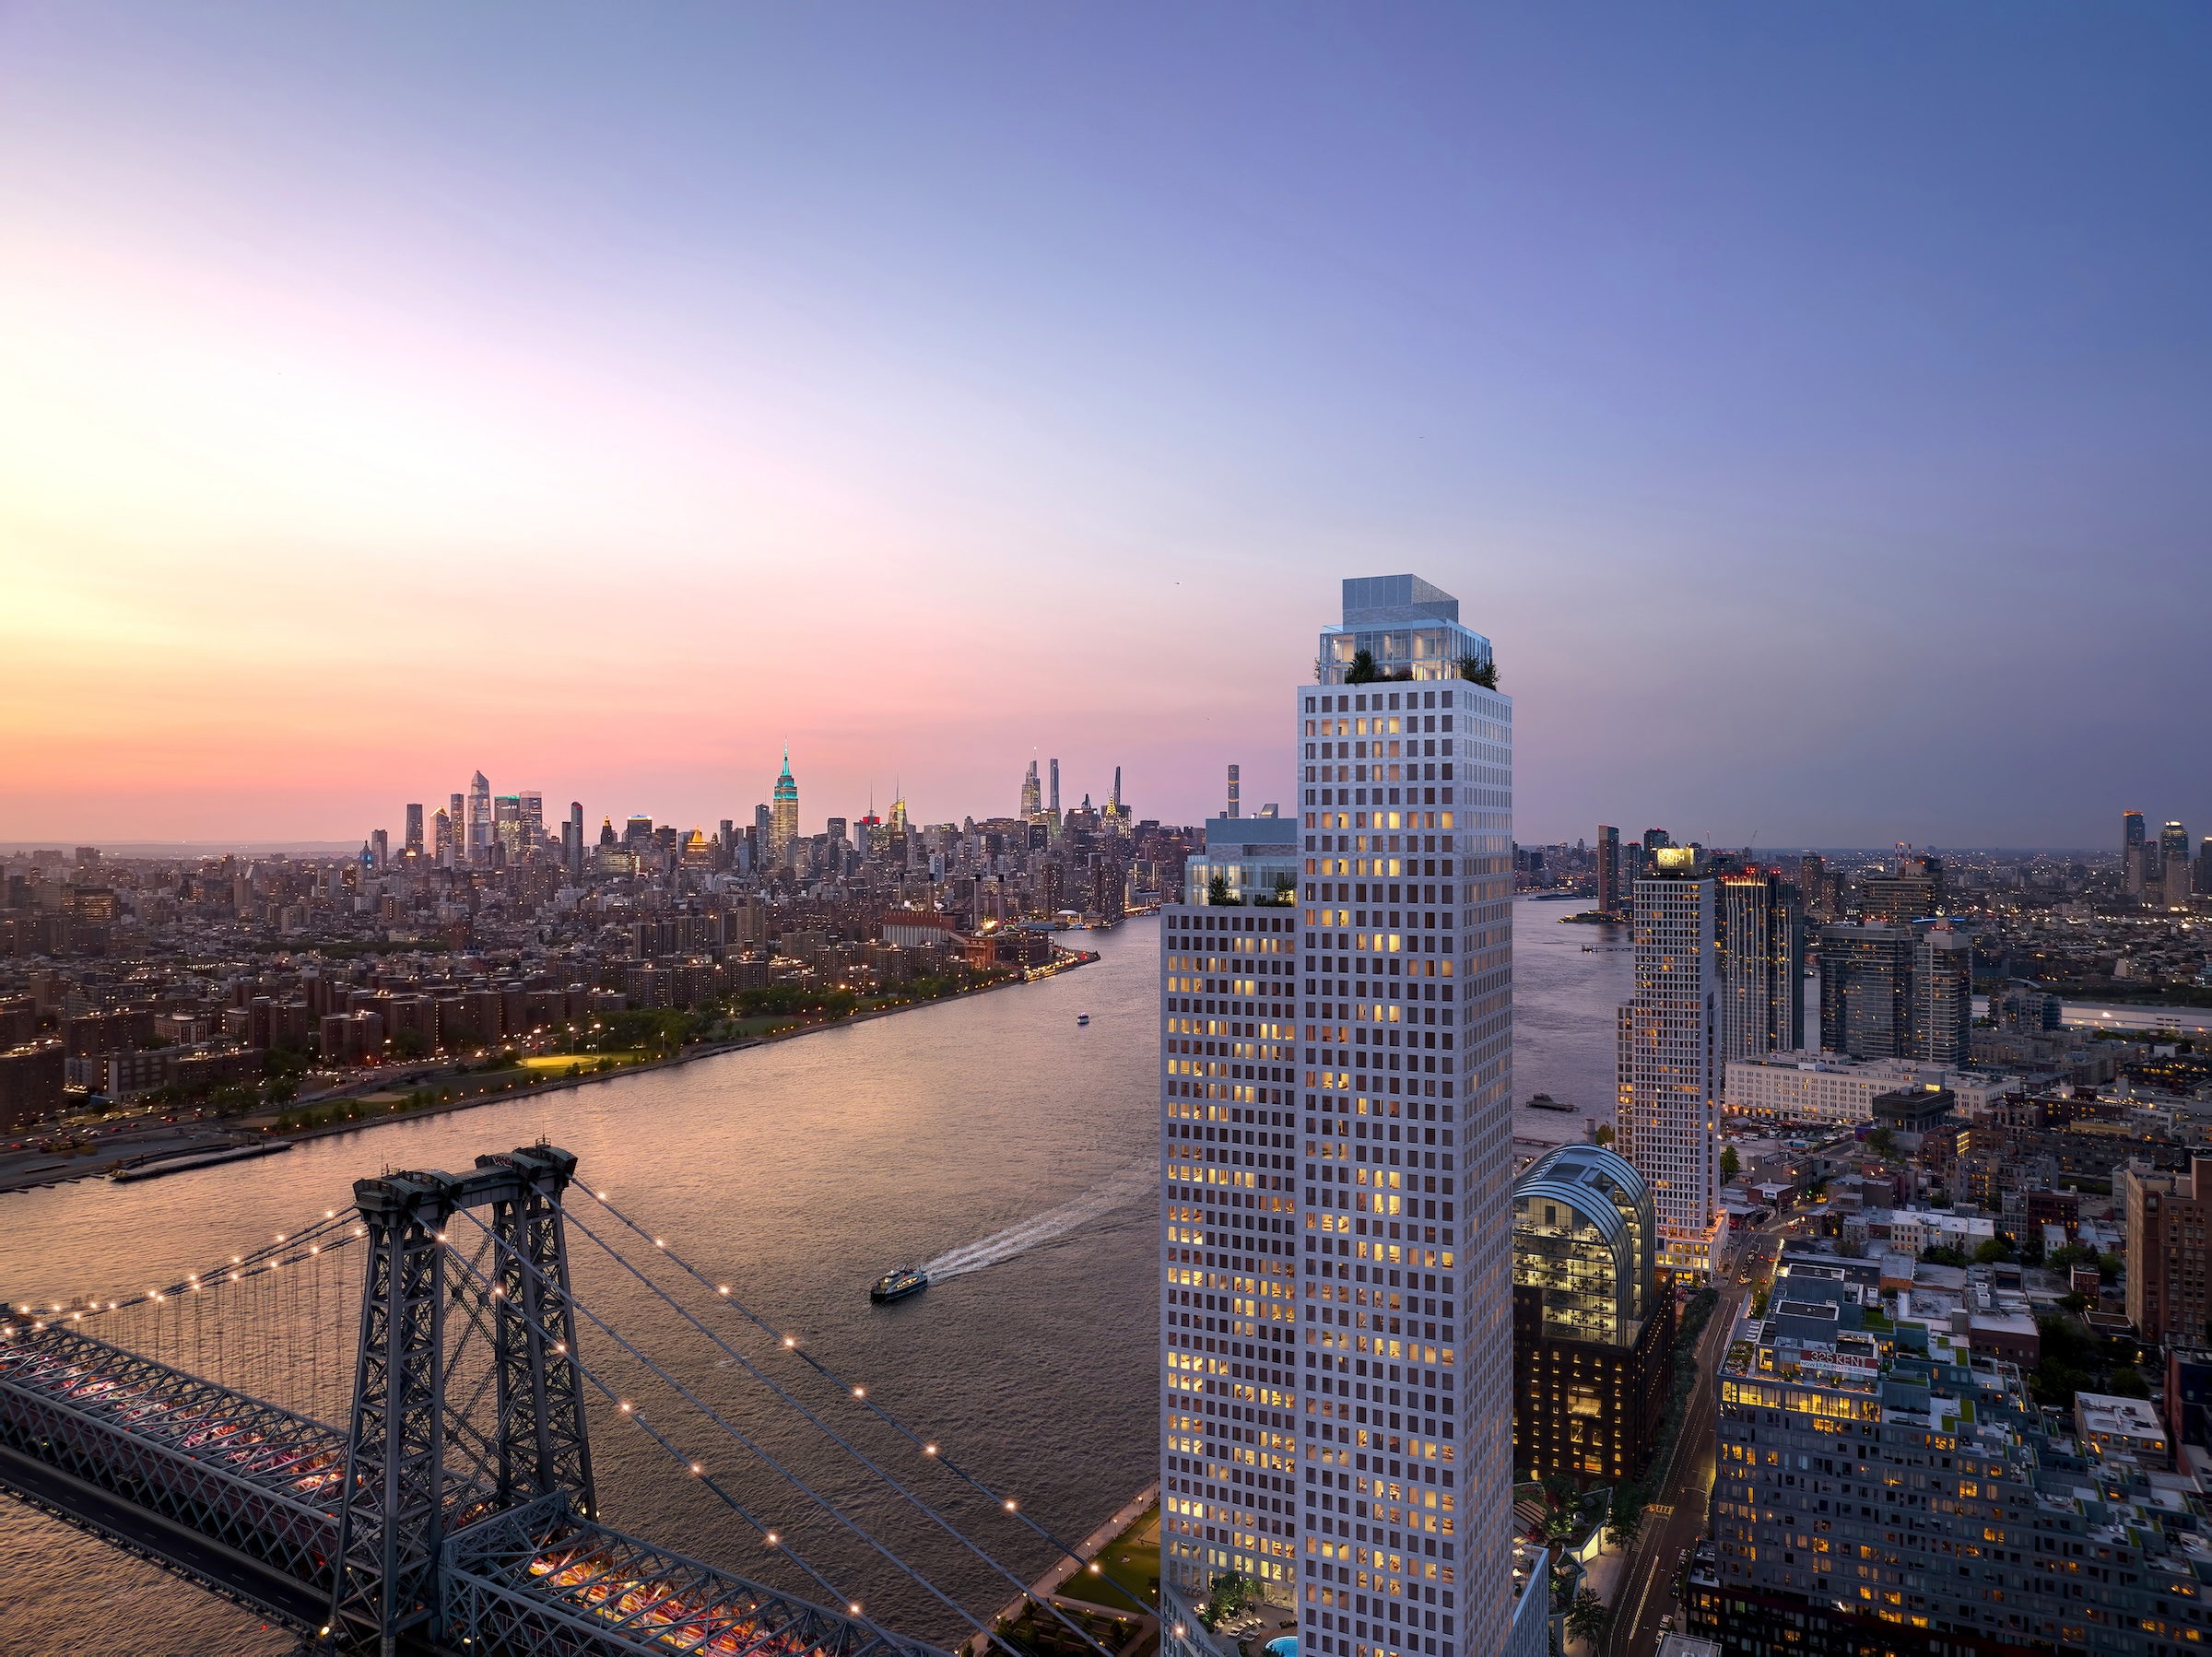 On the Domino Sugar refinery site, new Brooklyn condos offer views of the Manhattan skyline